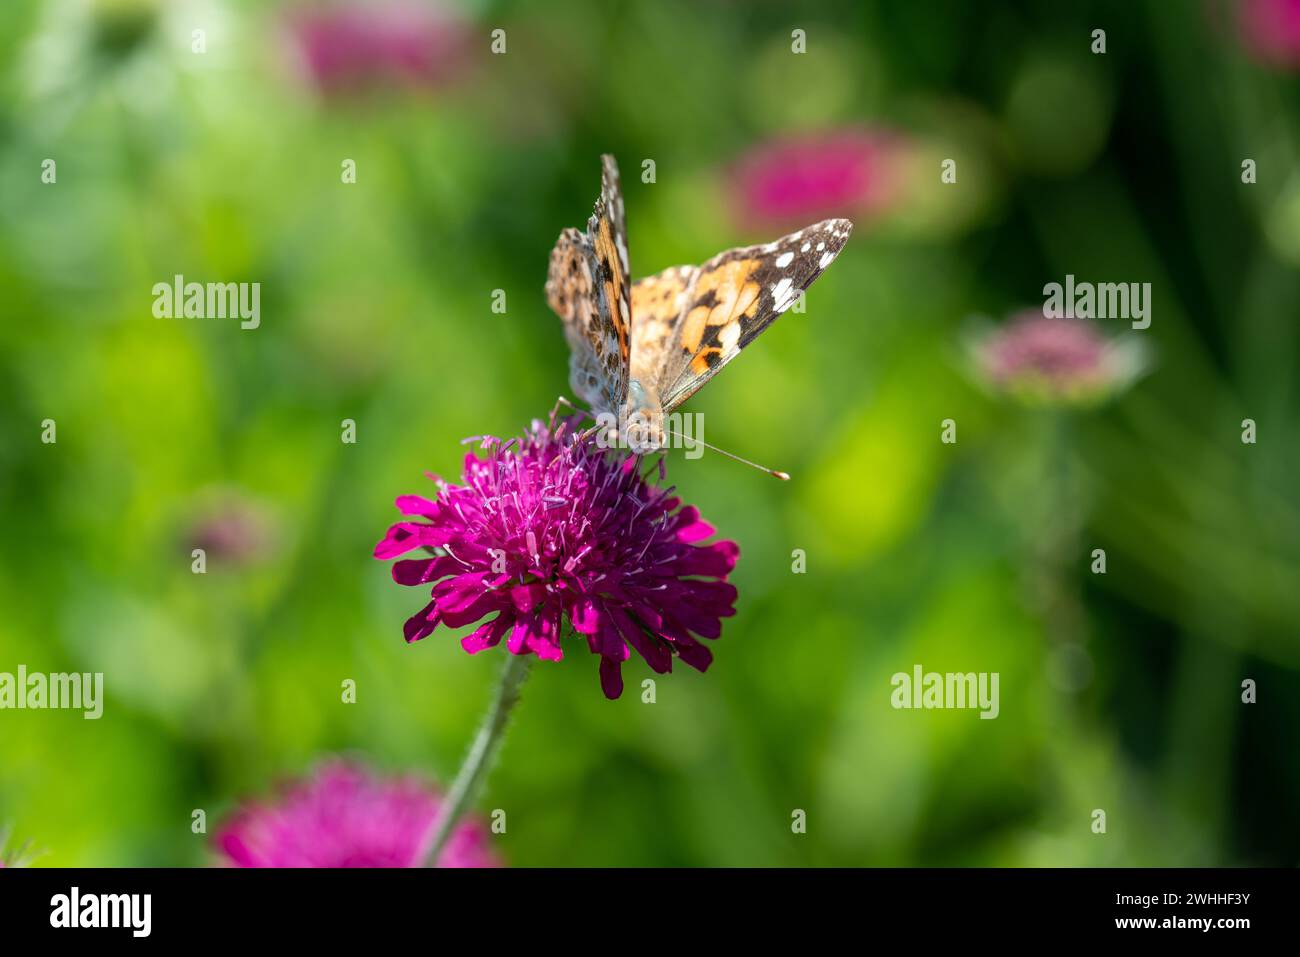 Close-up of a Painted Lady Butterfly on Knautia macedonia with a defocused background Stock Photo